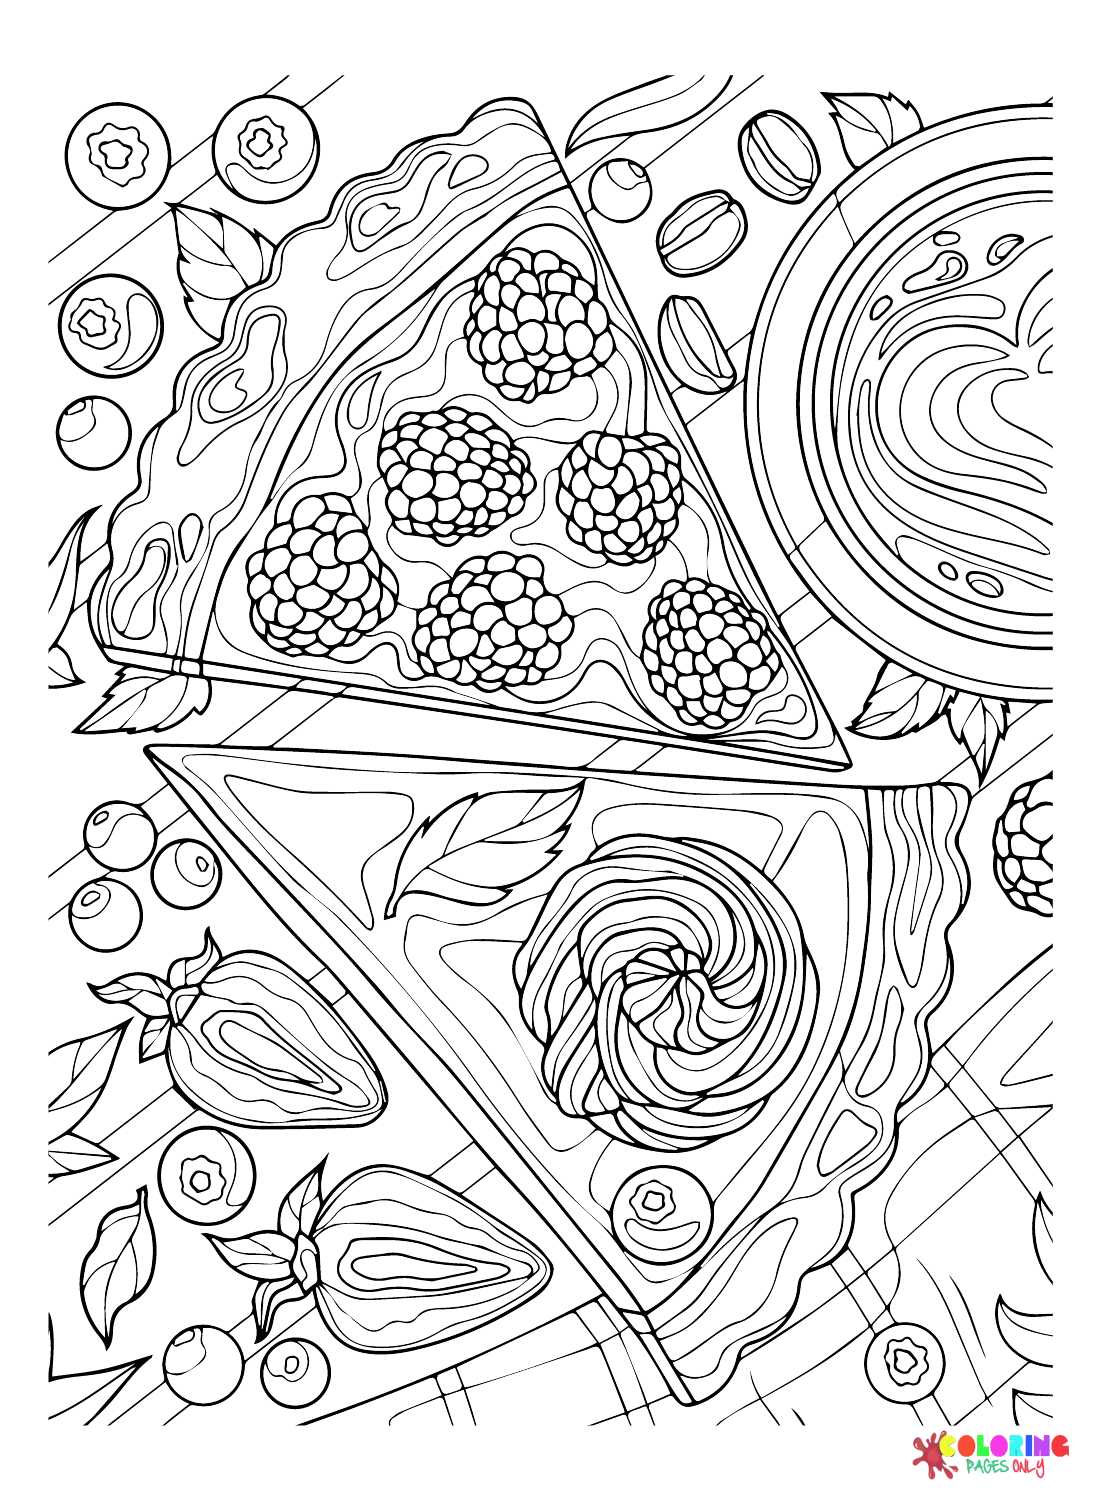 Berry Cake Coloring Page